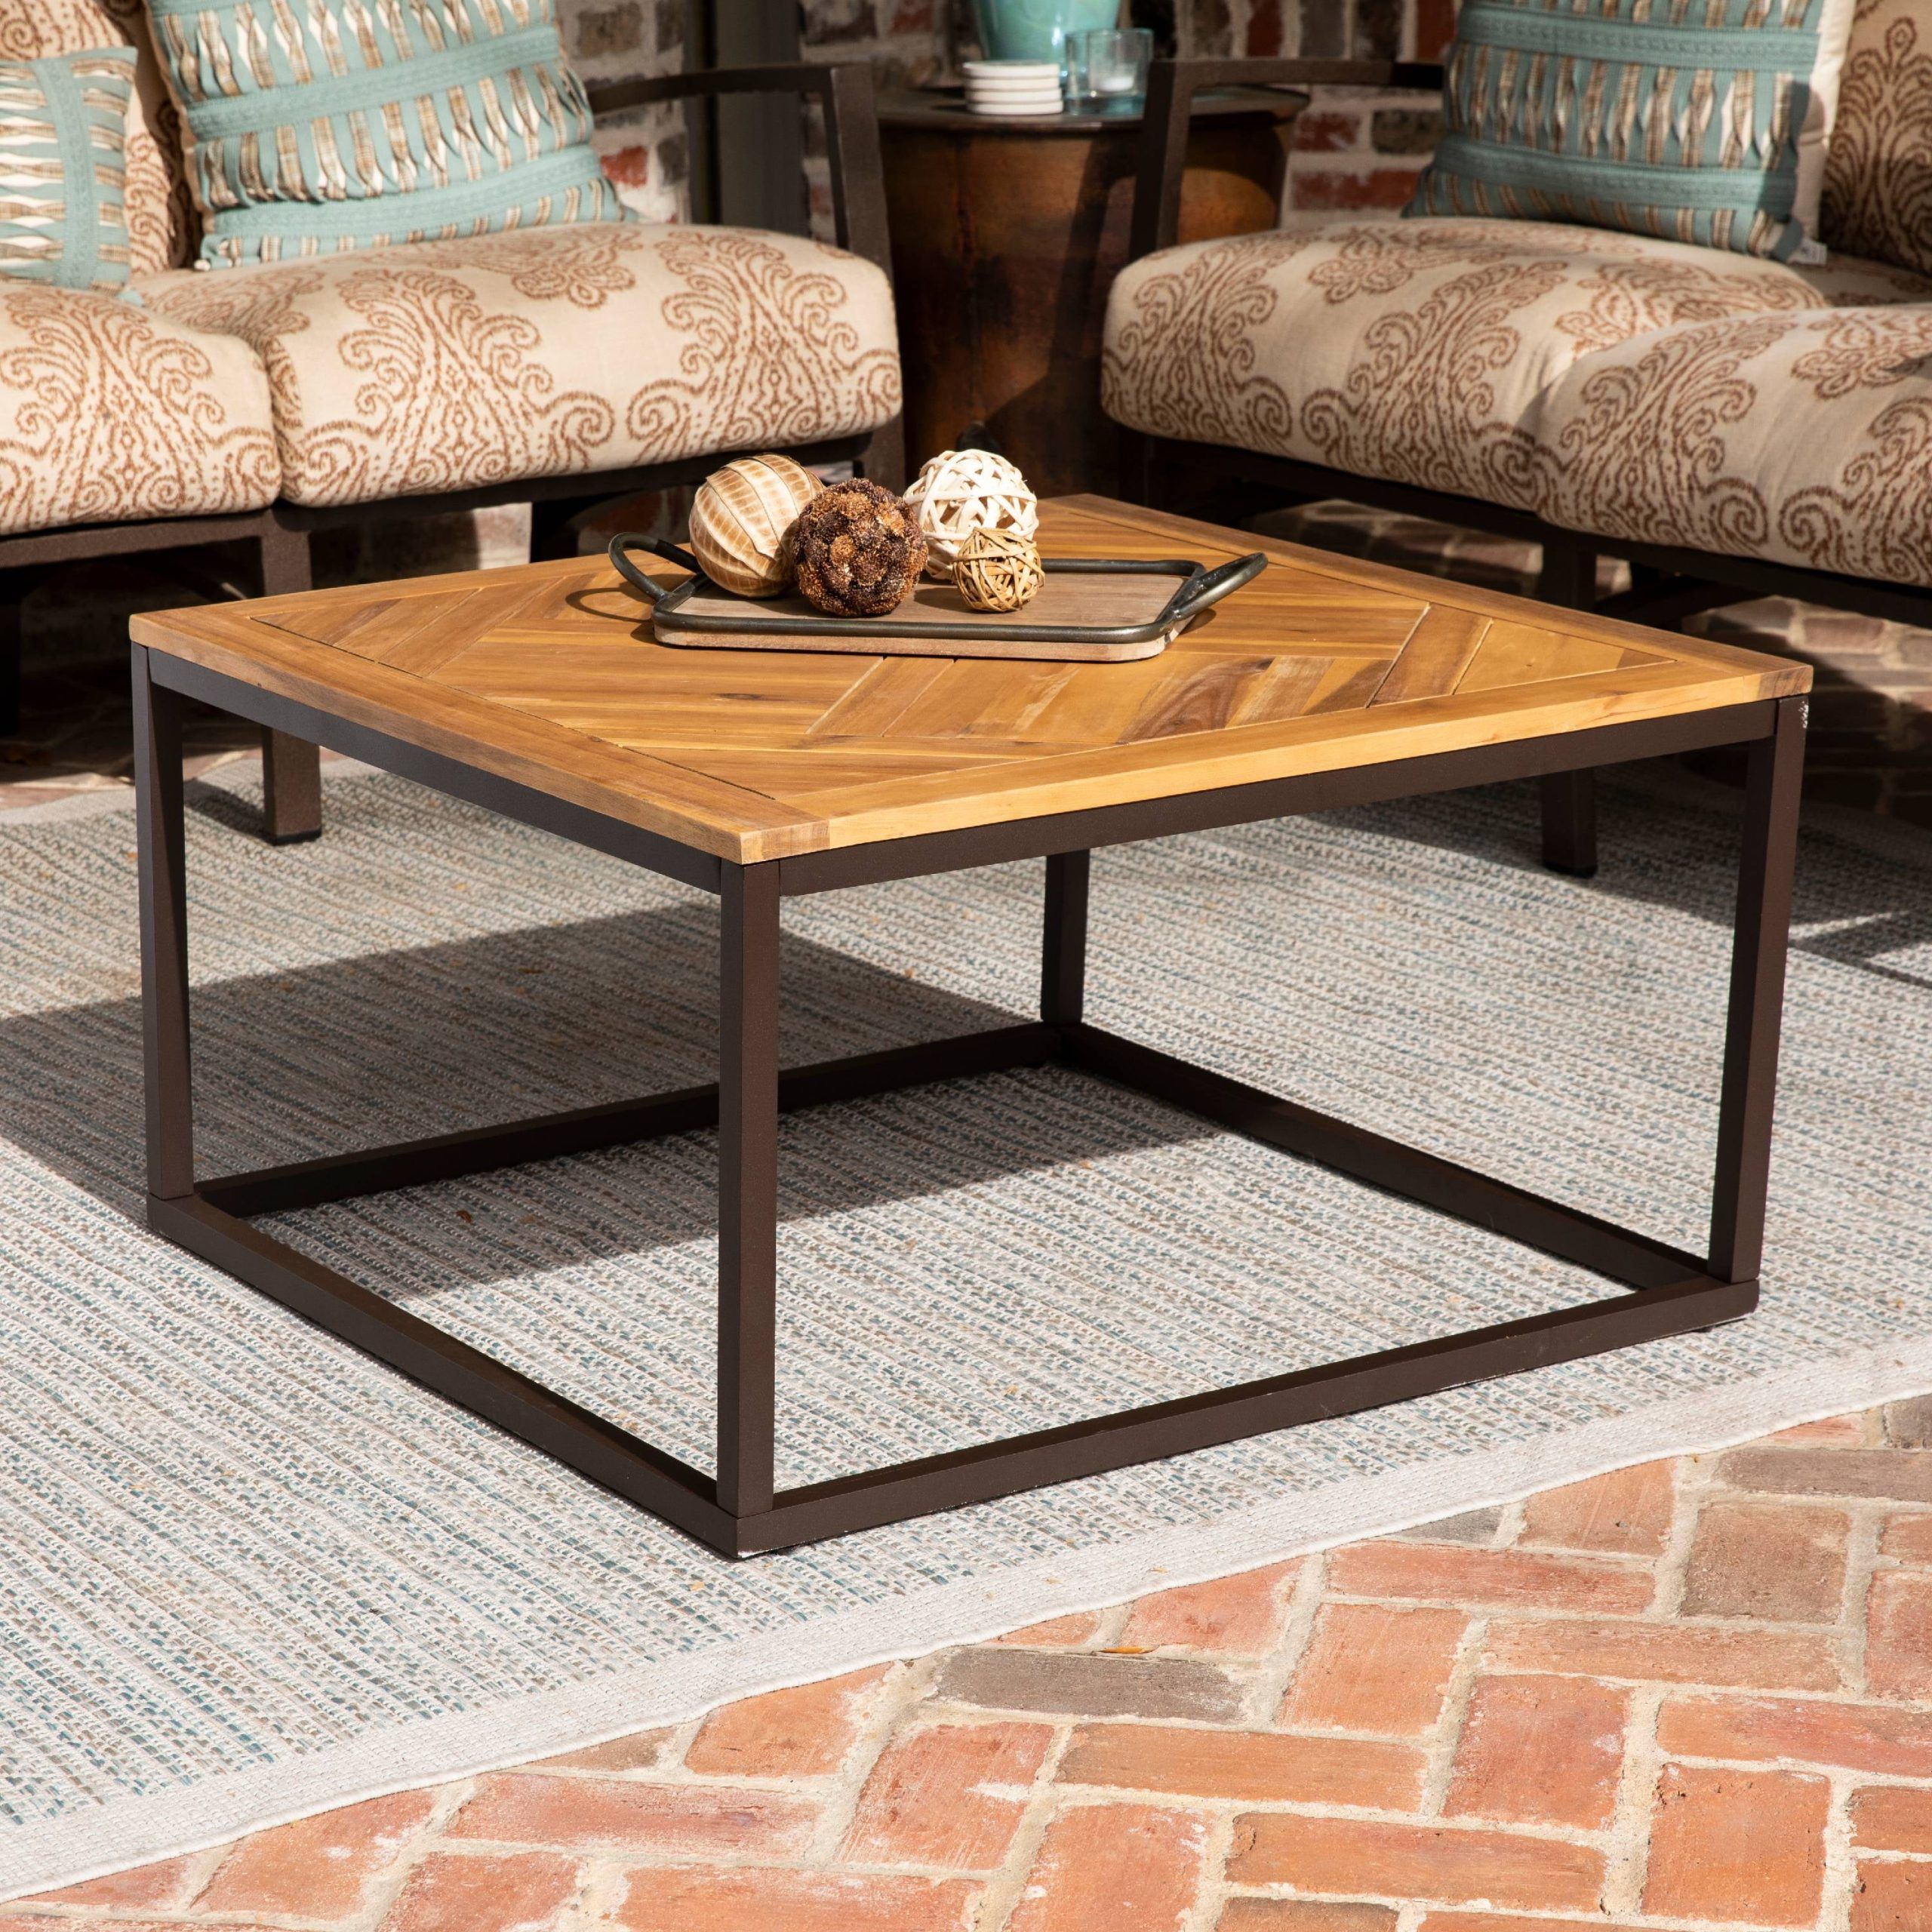 Southern Enterprises Larksmill Modern Outdoor Coffee Table – Walmart For Southern Enterprises Larksmill Coffee Tables (Gallery 1 of 20)